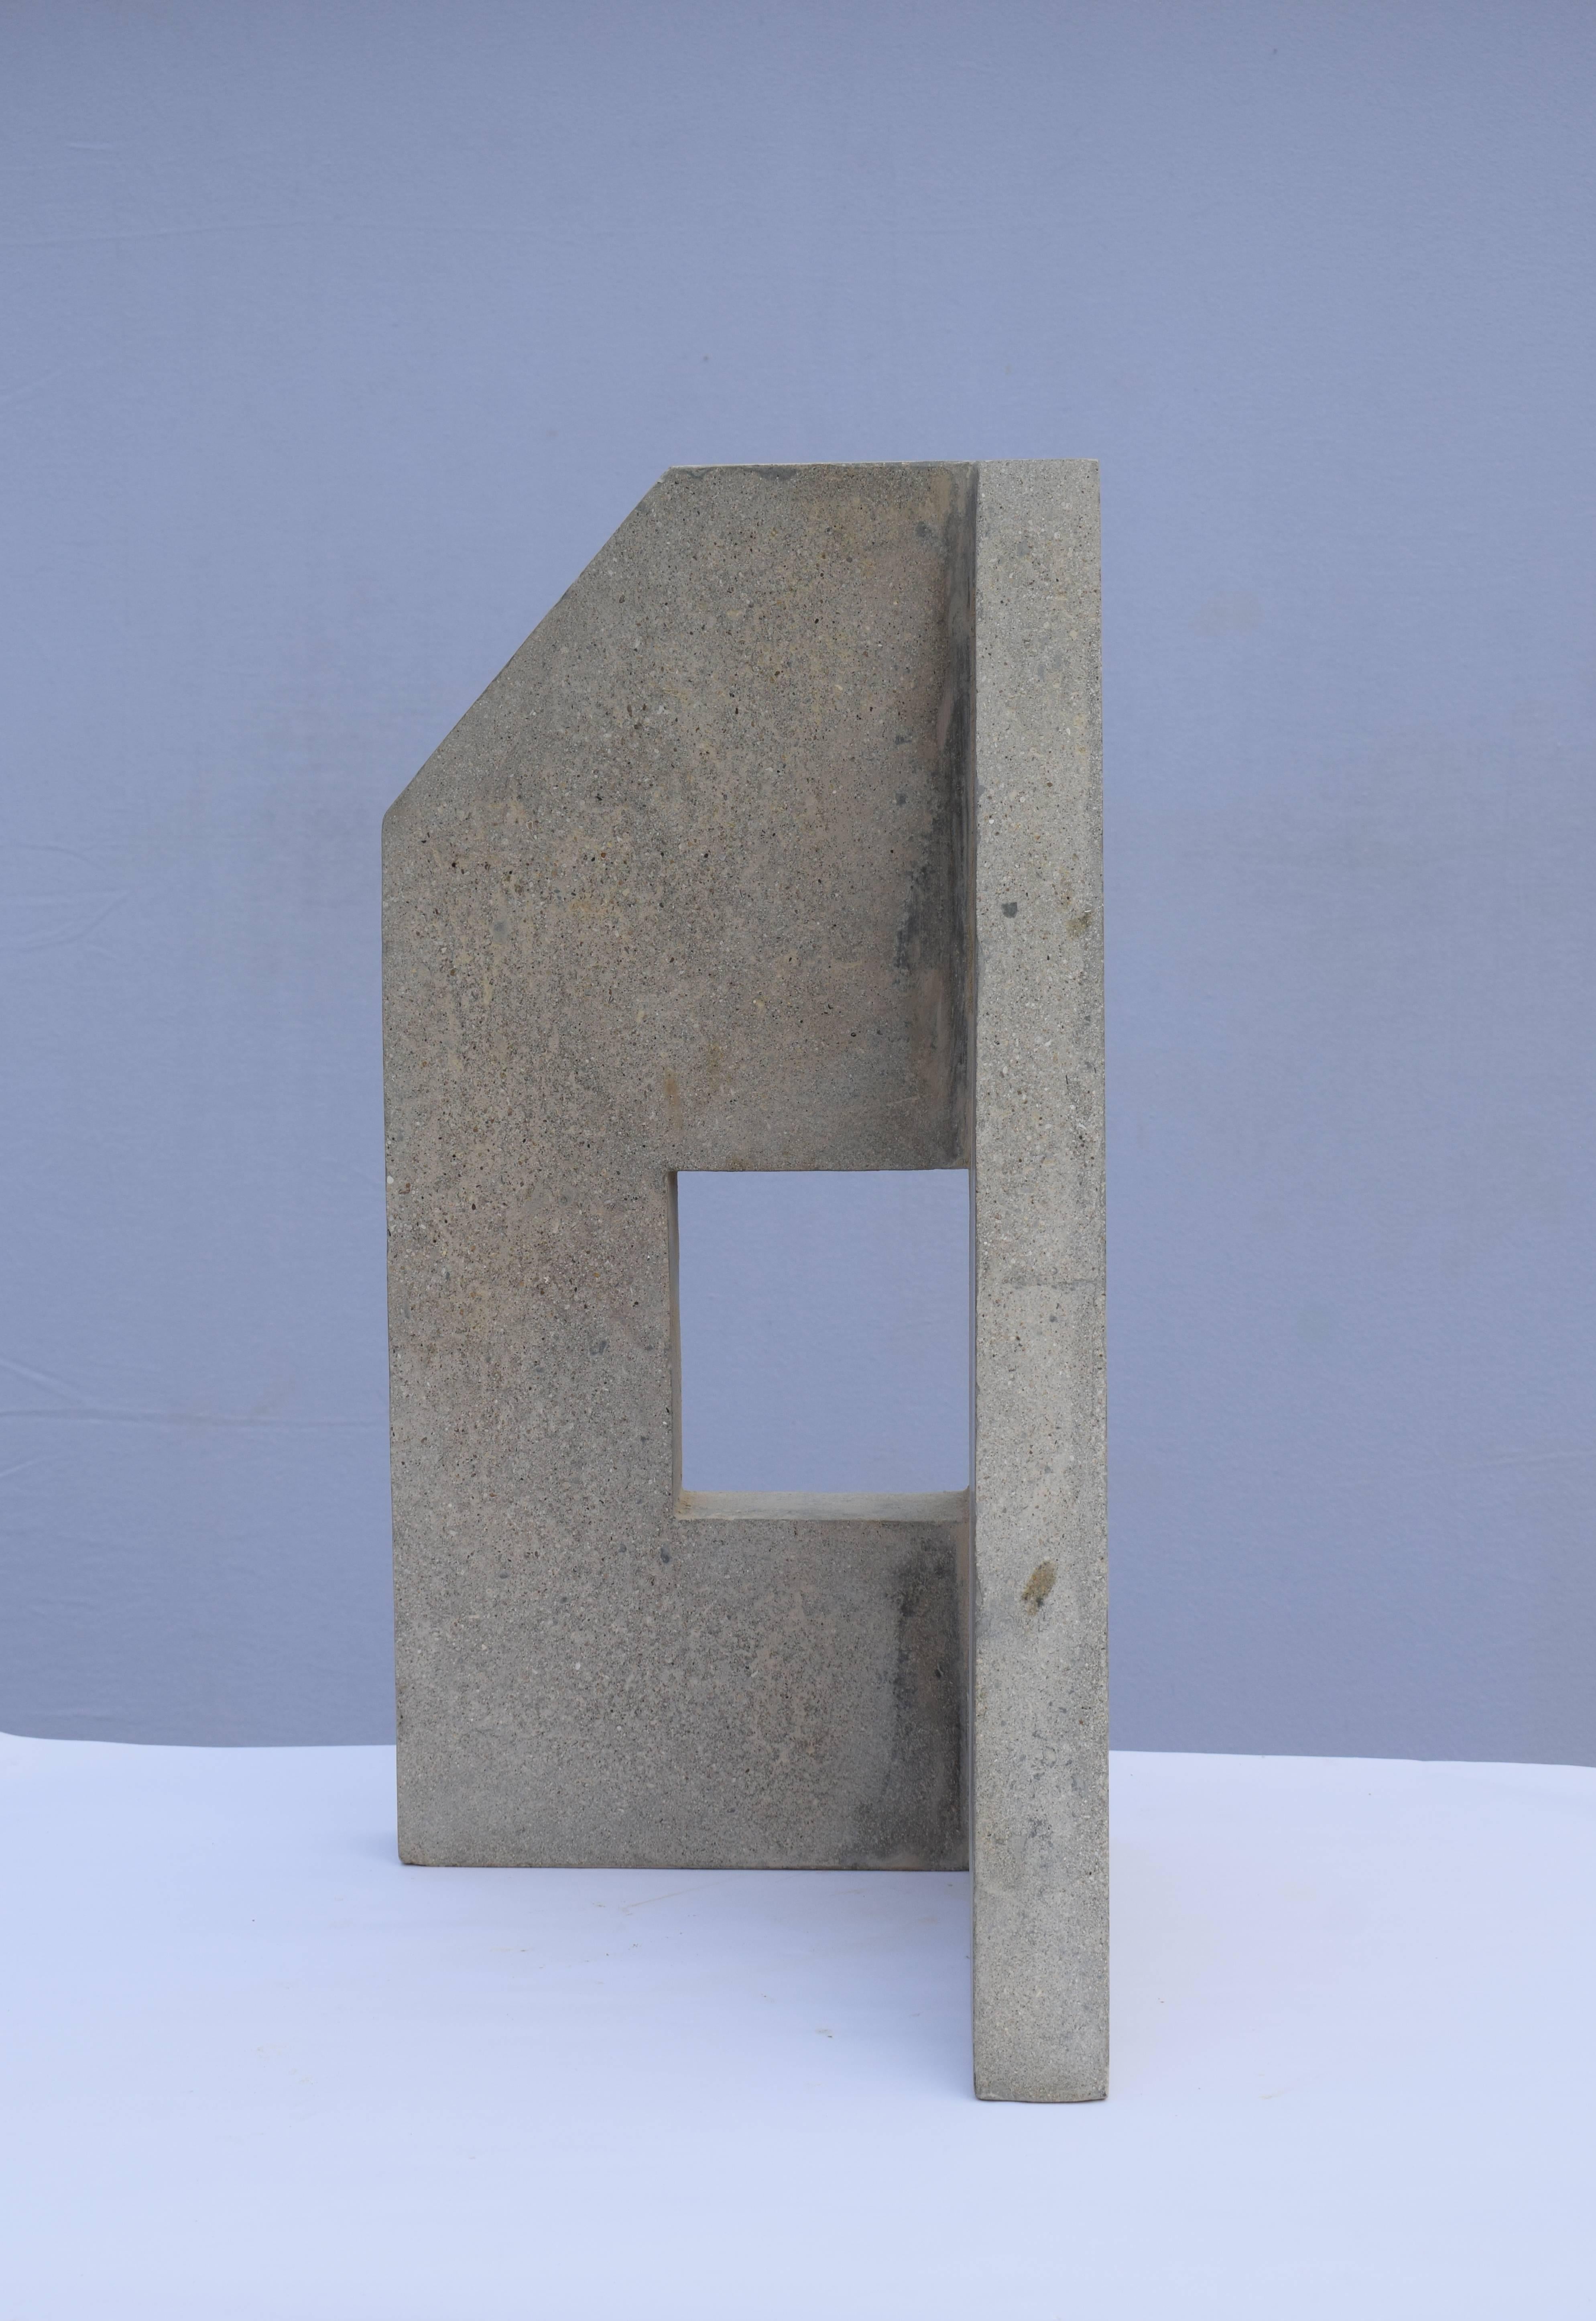 This is a cast concrete sculpture curated by Bask. The sculpture is 60cm high and 30cm wide. The thickness of the concrete is 5cm.

This is a new series of work by the London based sculpture collective Bask.
The series was realised during a